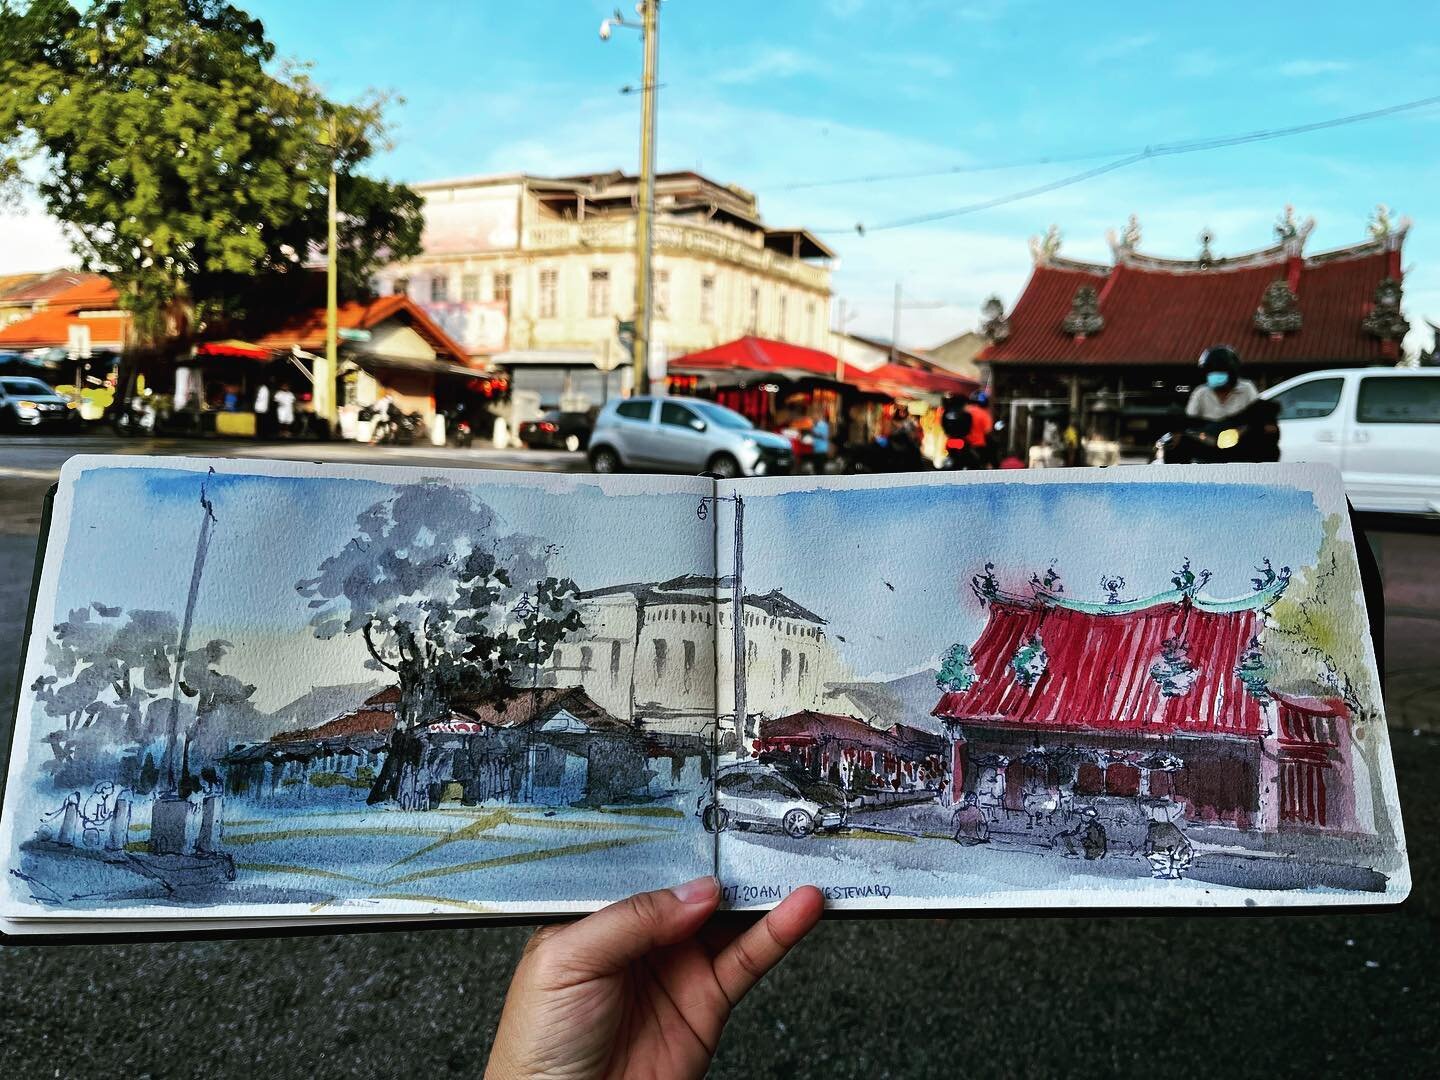 Double page spread in the morning. Just getting on with it before breakfast. The streets was still quiet. The Kuan Yin Temple is barely open. Sketch done in 1 hour 20 minutes. #georgetownpenang #watercoloursketch #pleinairpainting #sketchingonlocatio